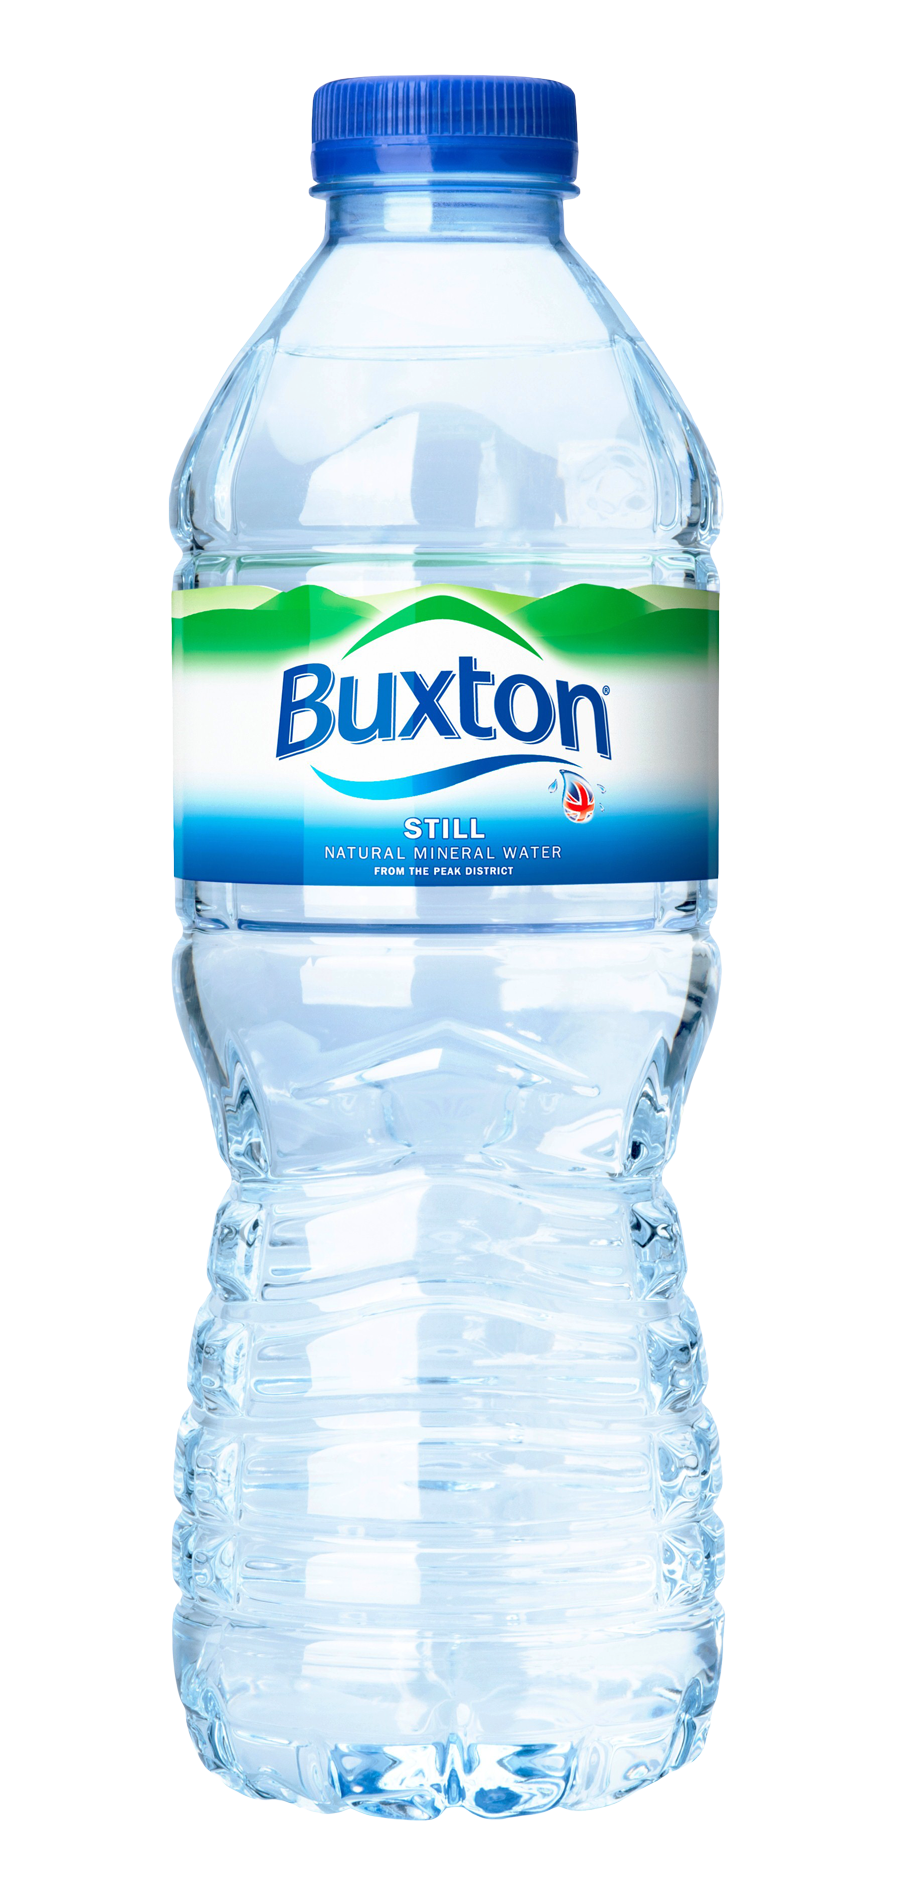 buxton brand plastic water bottle image png transparent background free download 48934 freeiconspng buxton brand plastic water bottle image